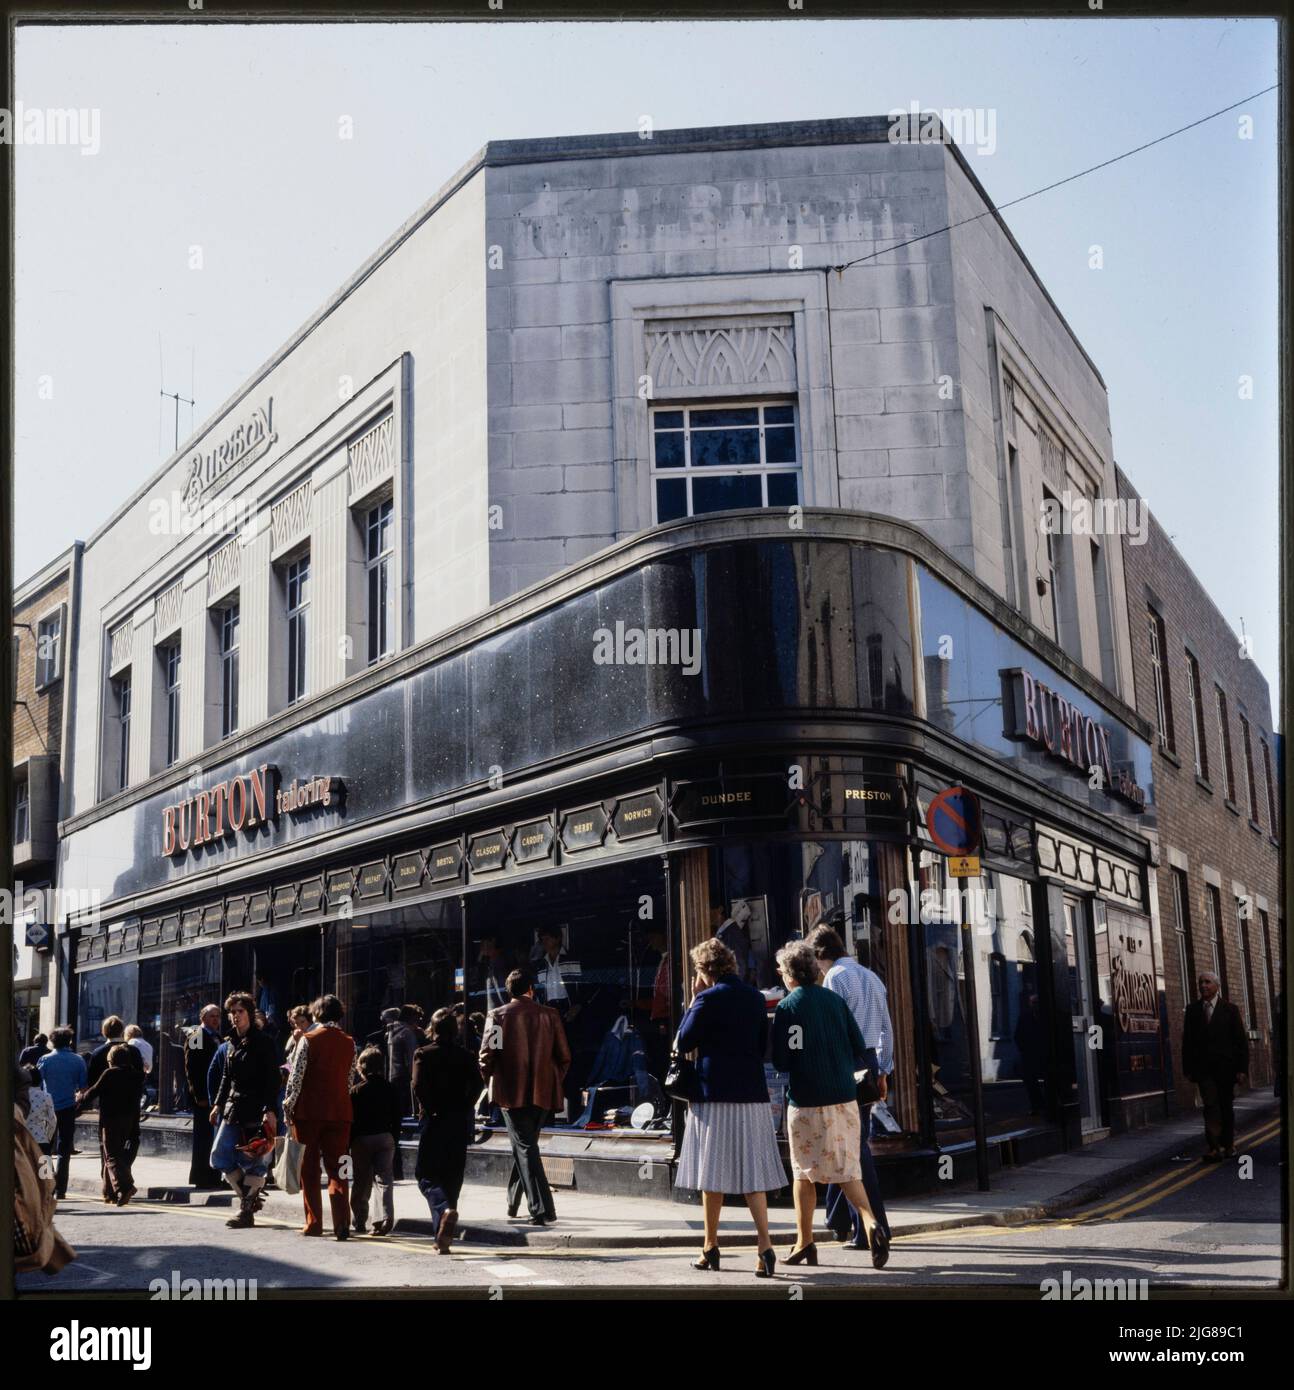 Burton, 16-18 High Street, Abergavenny, Monmouthshire, Wales, 1980s-1990s. The Burton store at 16-18 High Street, showing the carved logo, polished dark stone facade, and chain of merit transom lights. The Burton store in Abergavenny was built in 1937, and a foundation stone was laid by Raymond Montague Burton in that year. The store was designed by their in-house architect Nathaniel Martin. It features common Burton motifs including the logo carved in relief in stone, the 'chain of merit' transom lights at the top of the shopfront windows, and the fascia of polished dark stone. Stock Photo